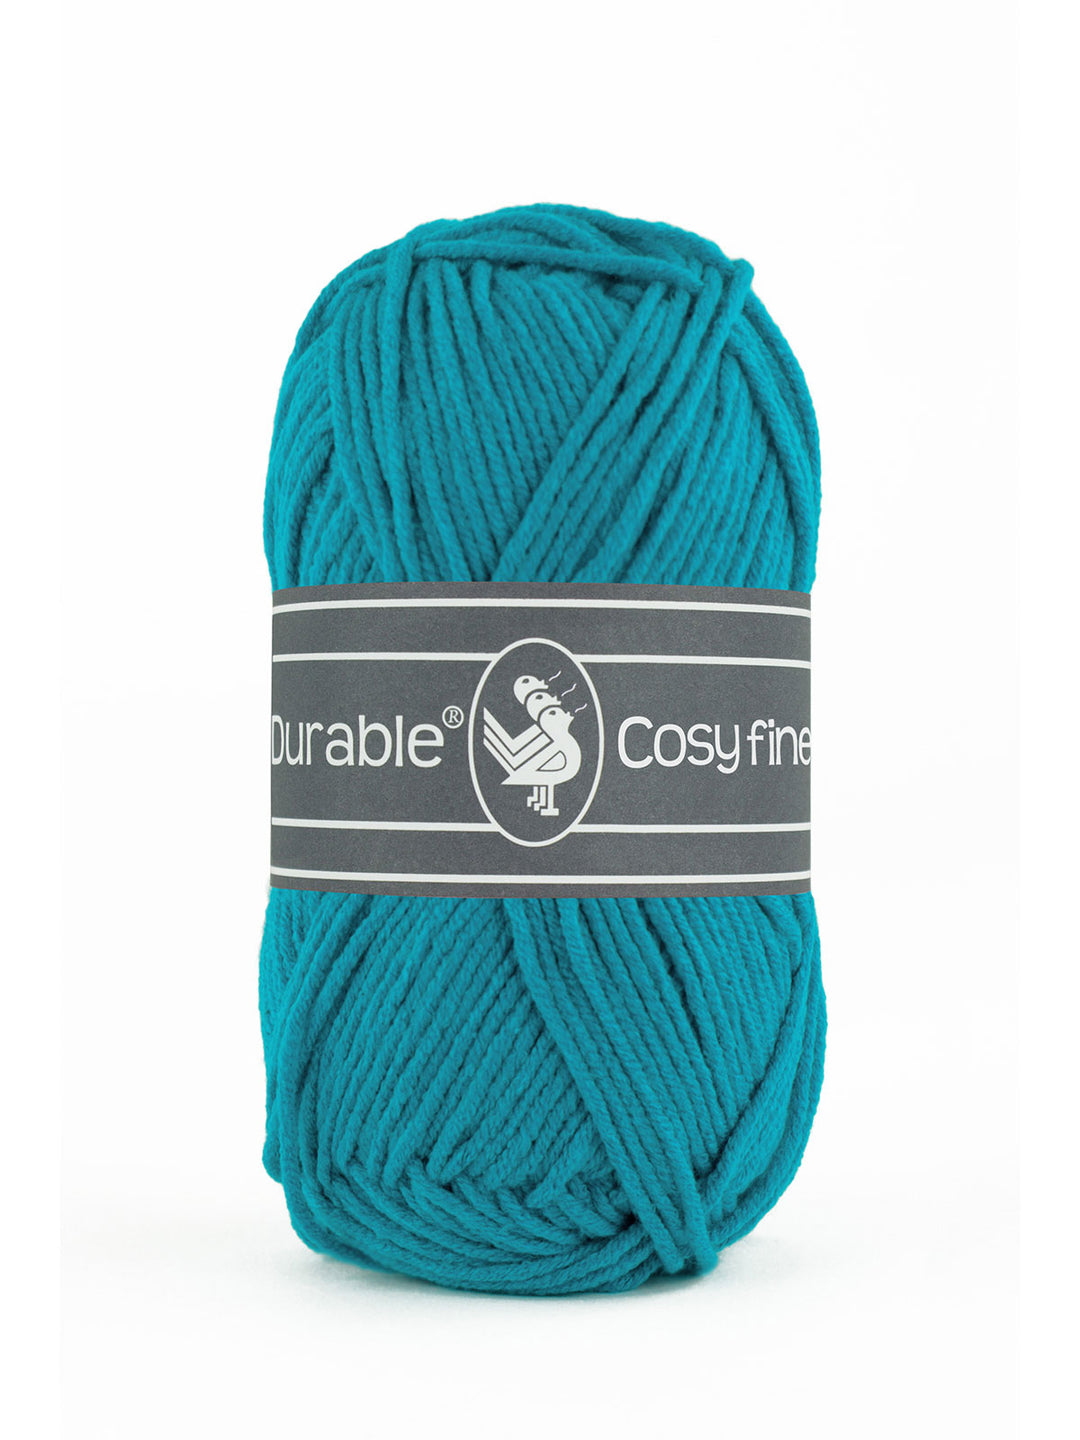 Durable Cosy Fine 371 Turquoise